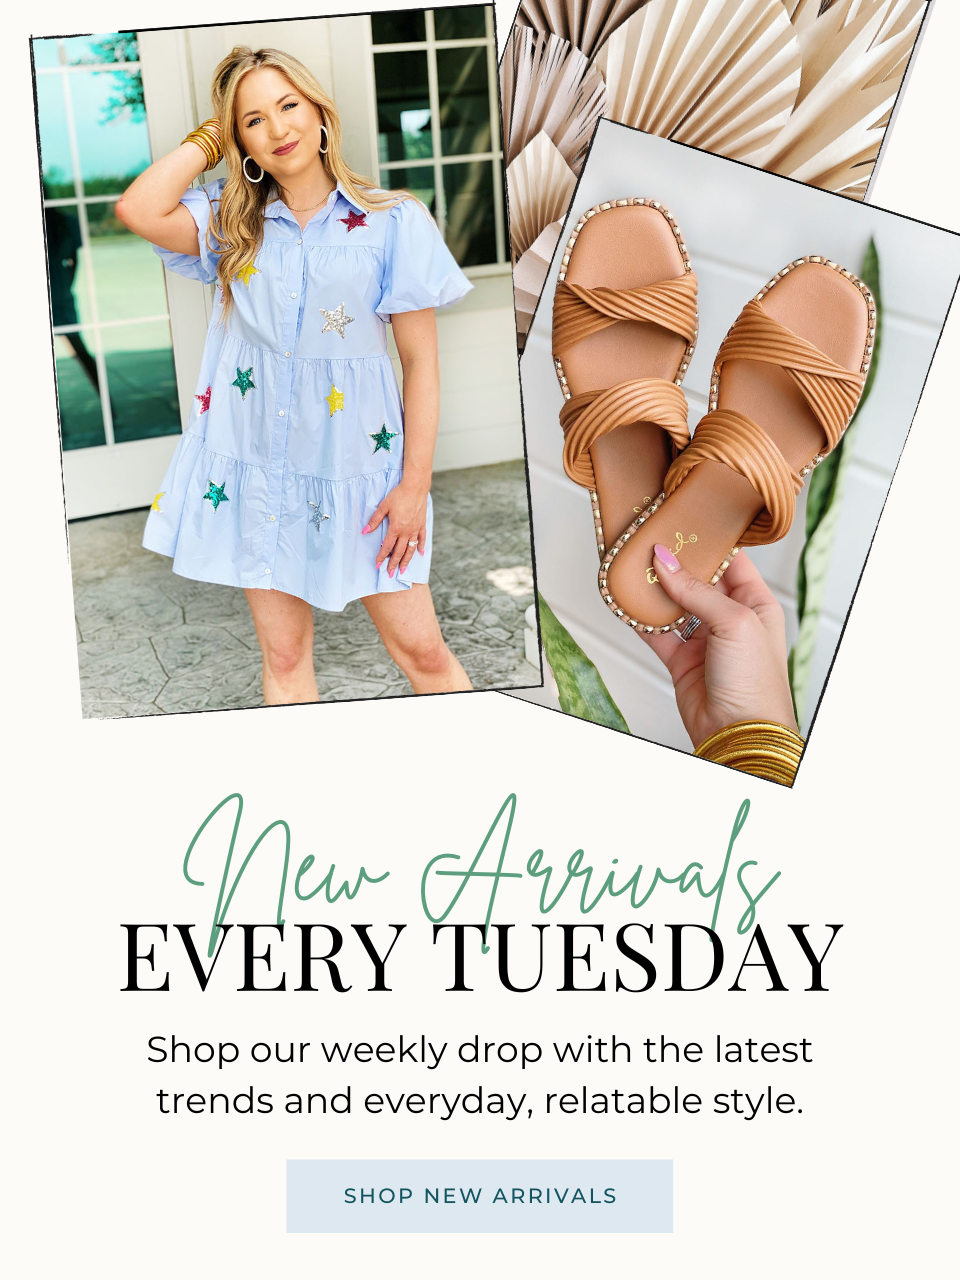 New arrivals every Tuesday at 10AM CST. Shop our weekly drop with the latest trends and everyday, relatable fashion. Model wearing a light blue tiered dress with short sleeves and sequins stars. Faux leather camel sandals with pleated strap detail and gold rivets.